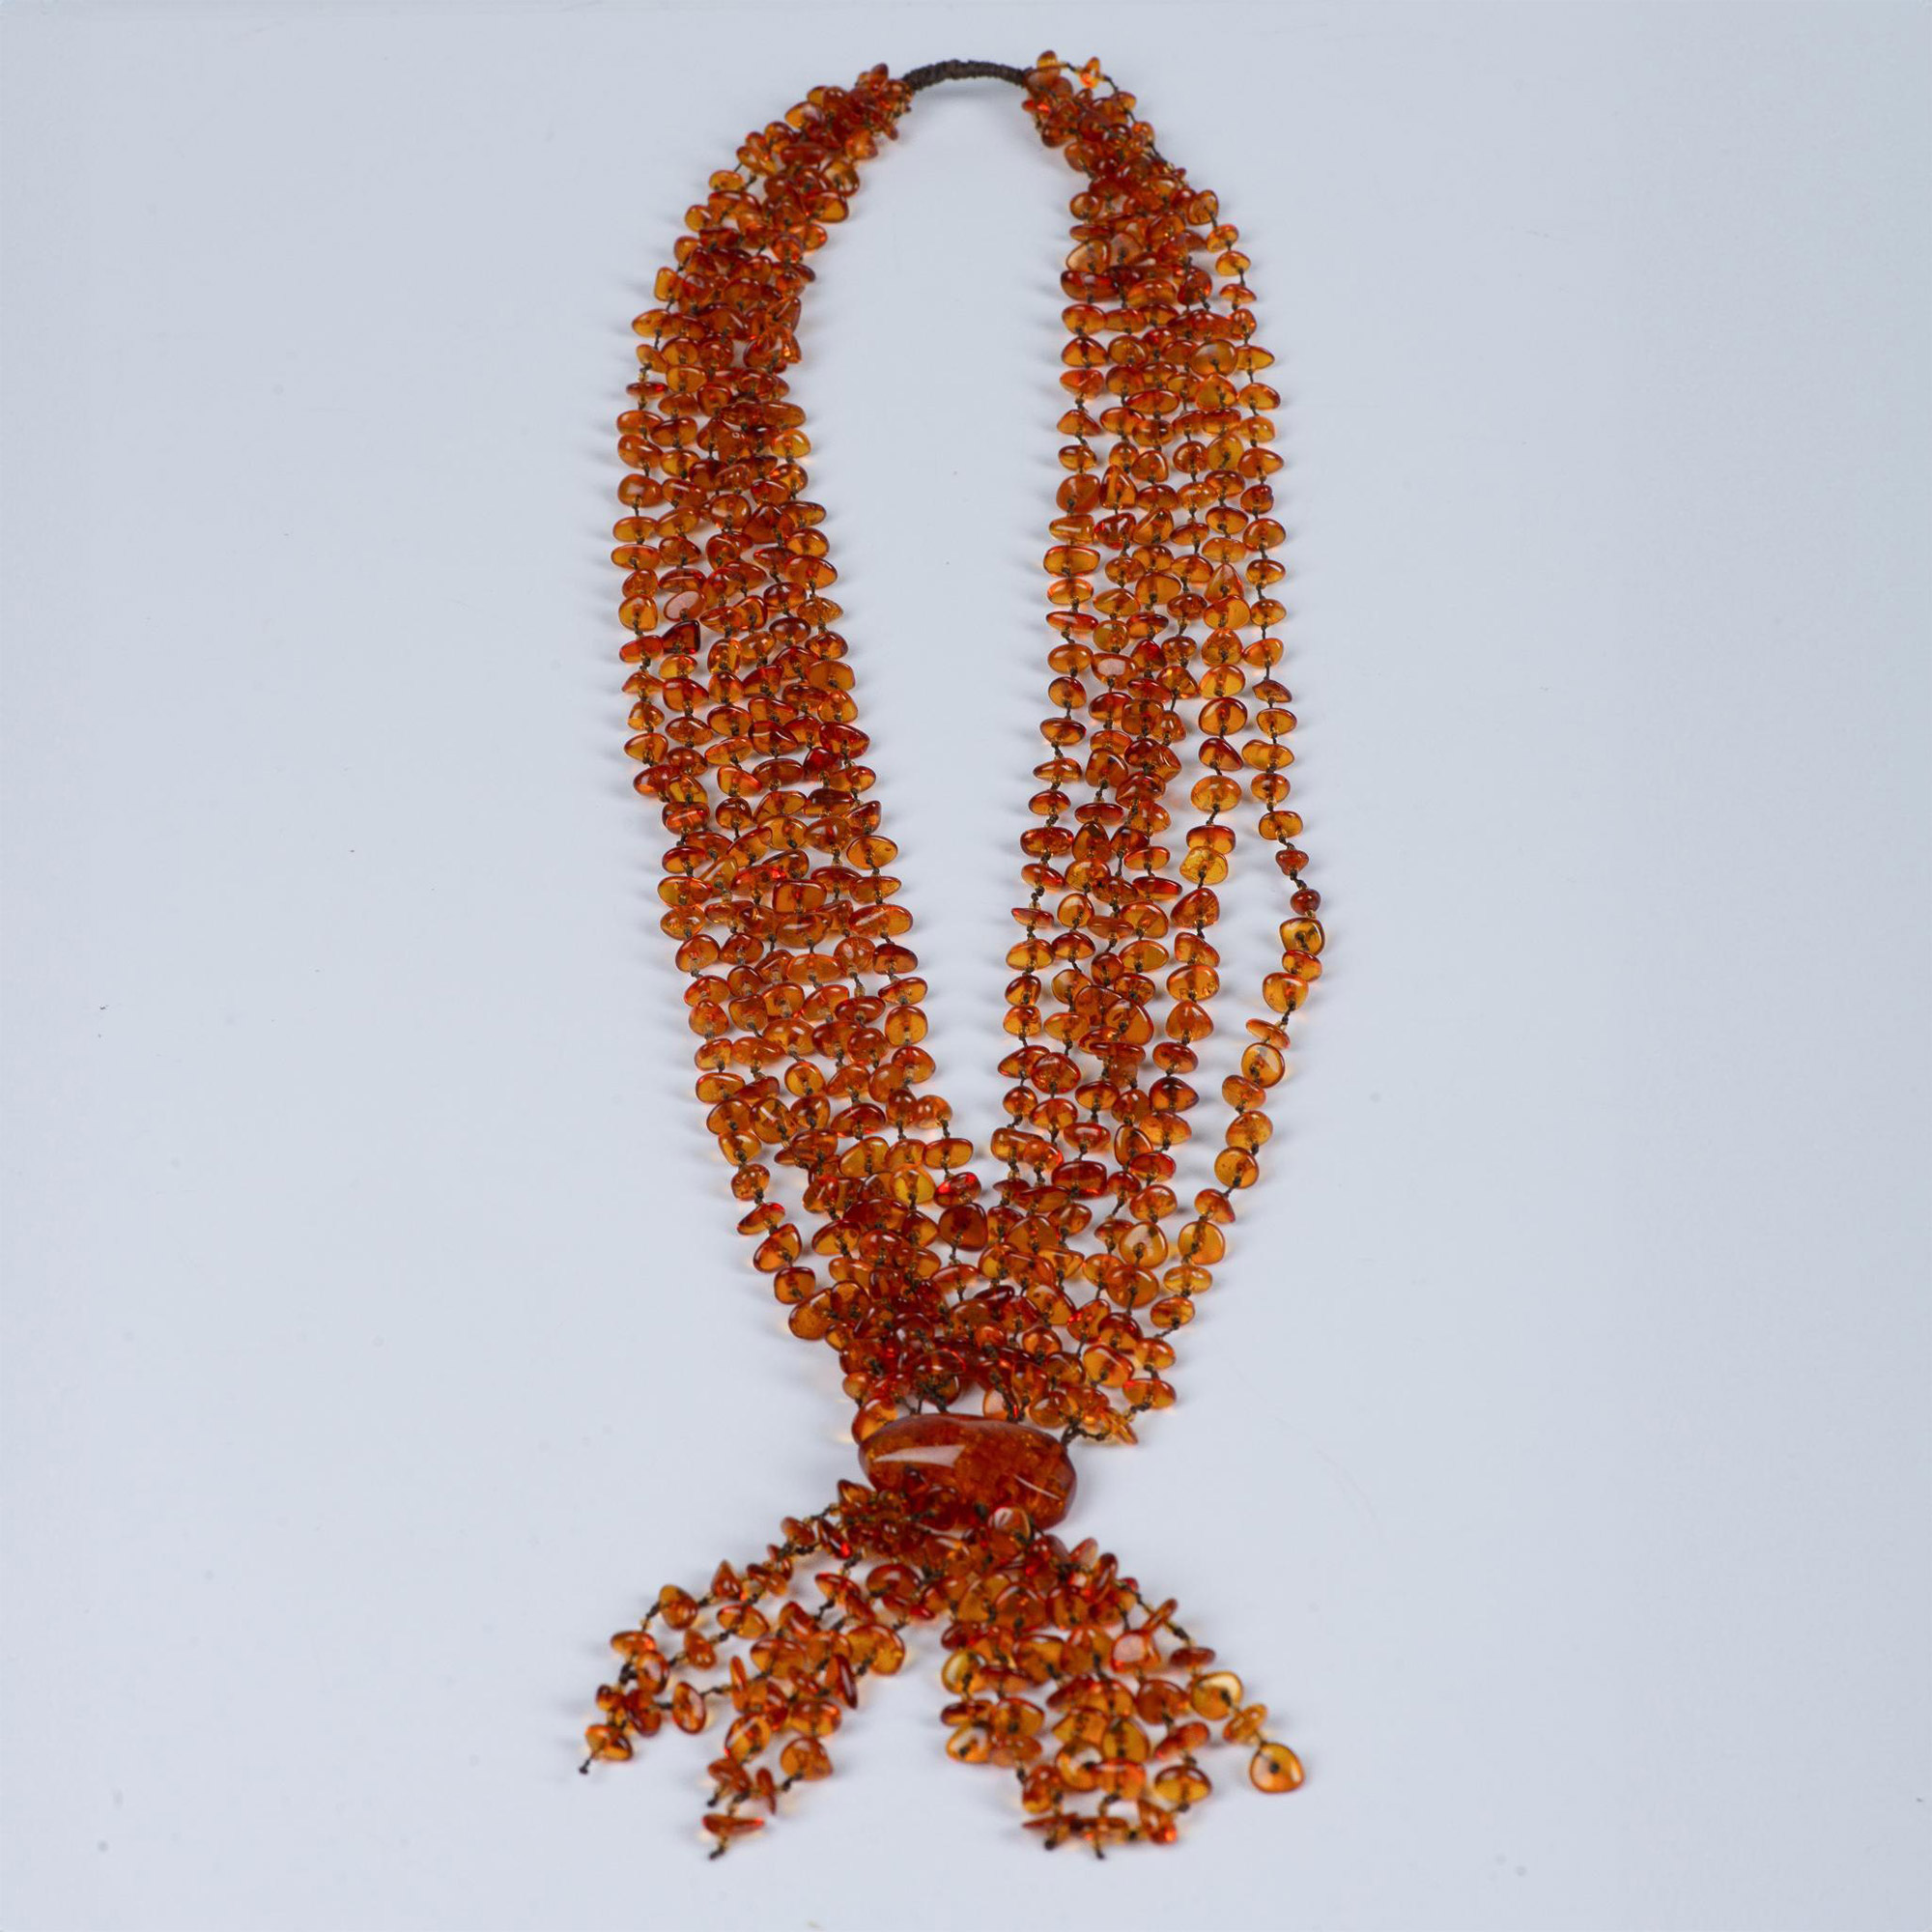 Russian Amber 6 Strand Necklace with Solid Stone Pendant - Image 2 of 4